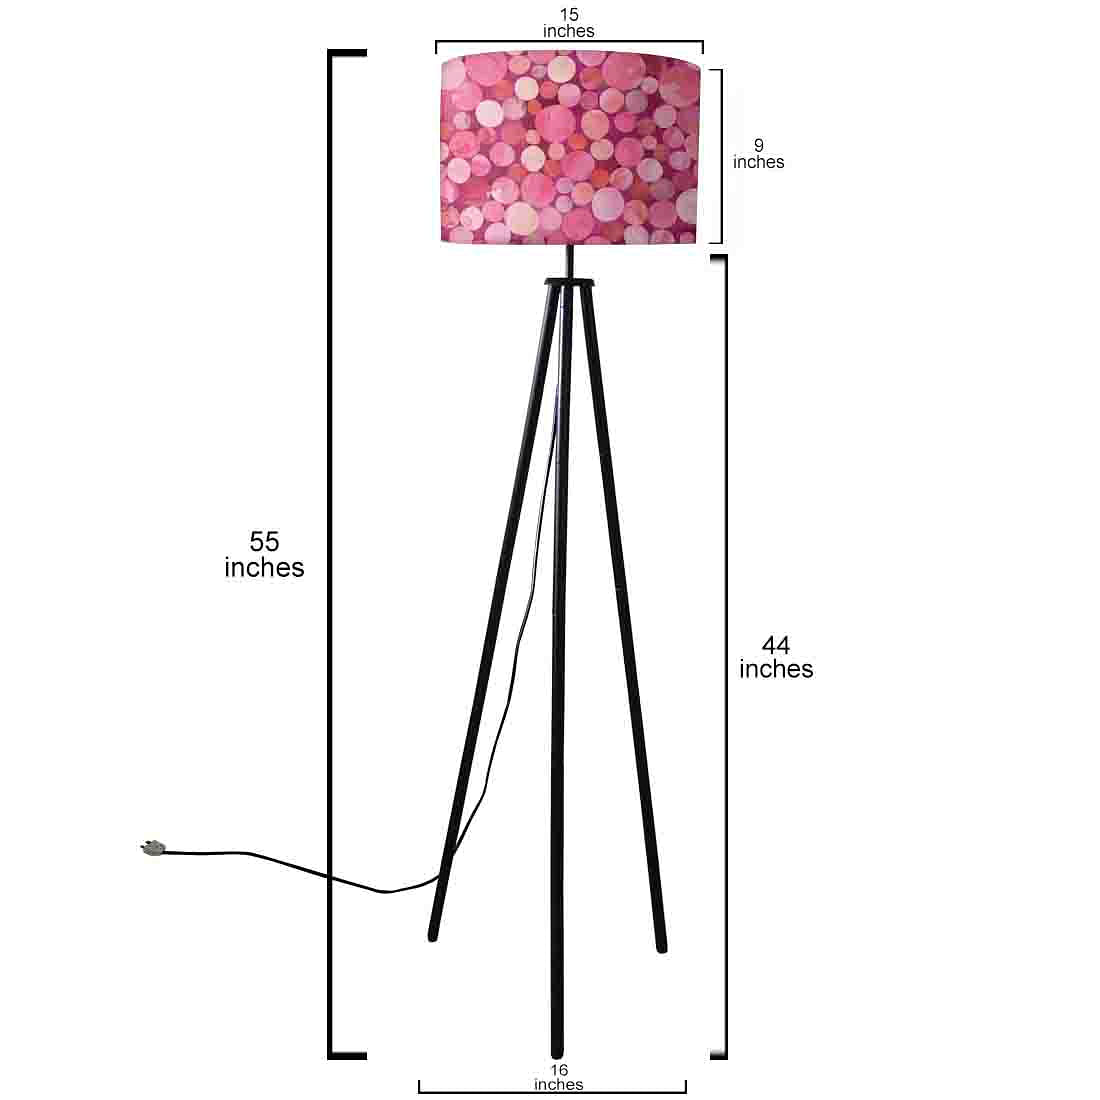 Tripod Floor Lamp Standing Light for Living Rooms -Pink Confetti Nutcase